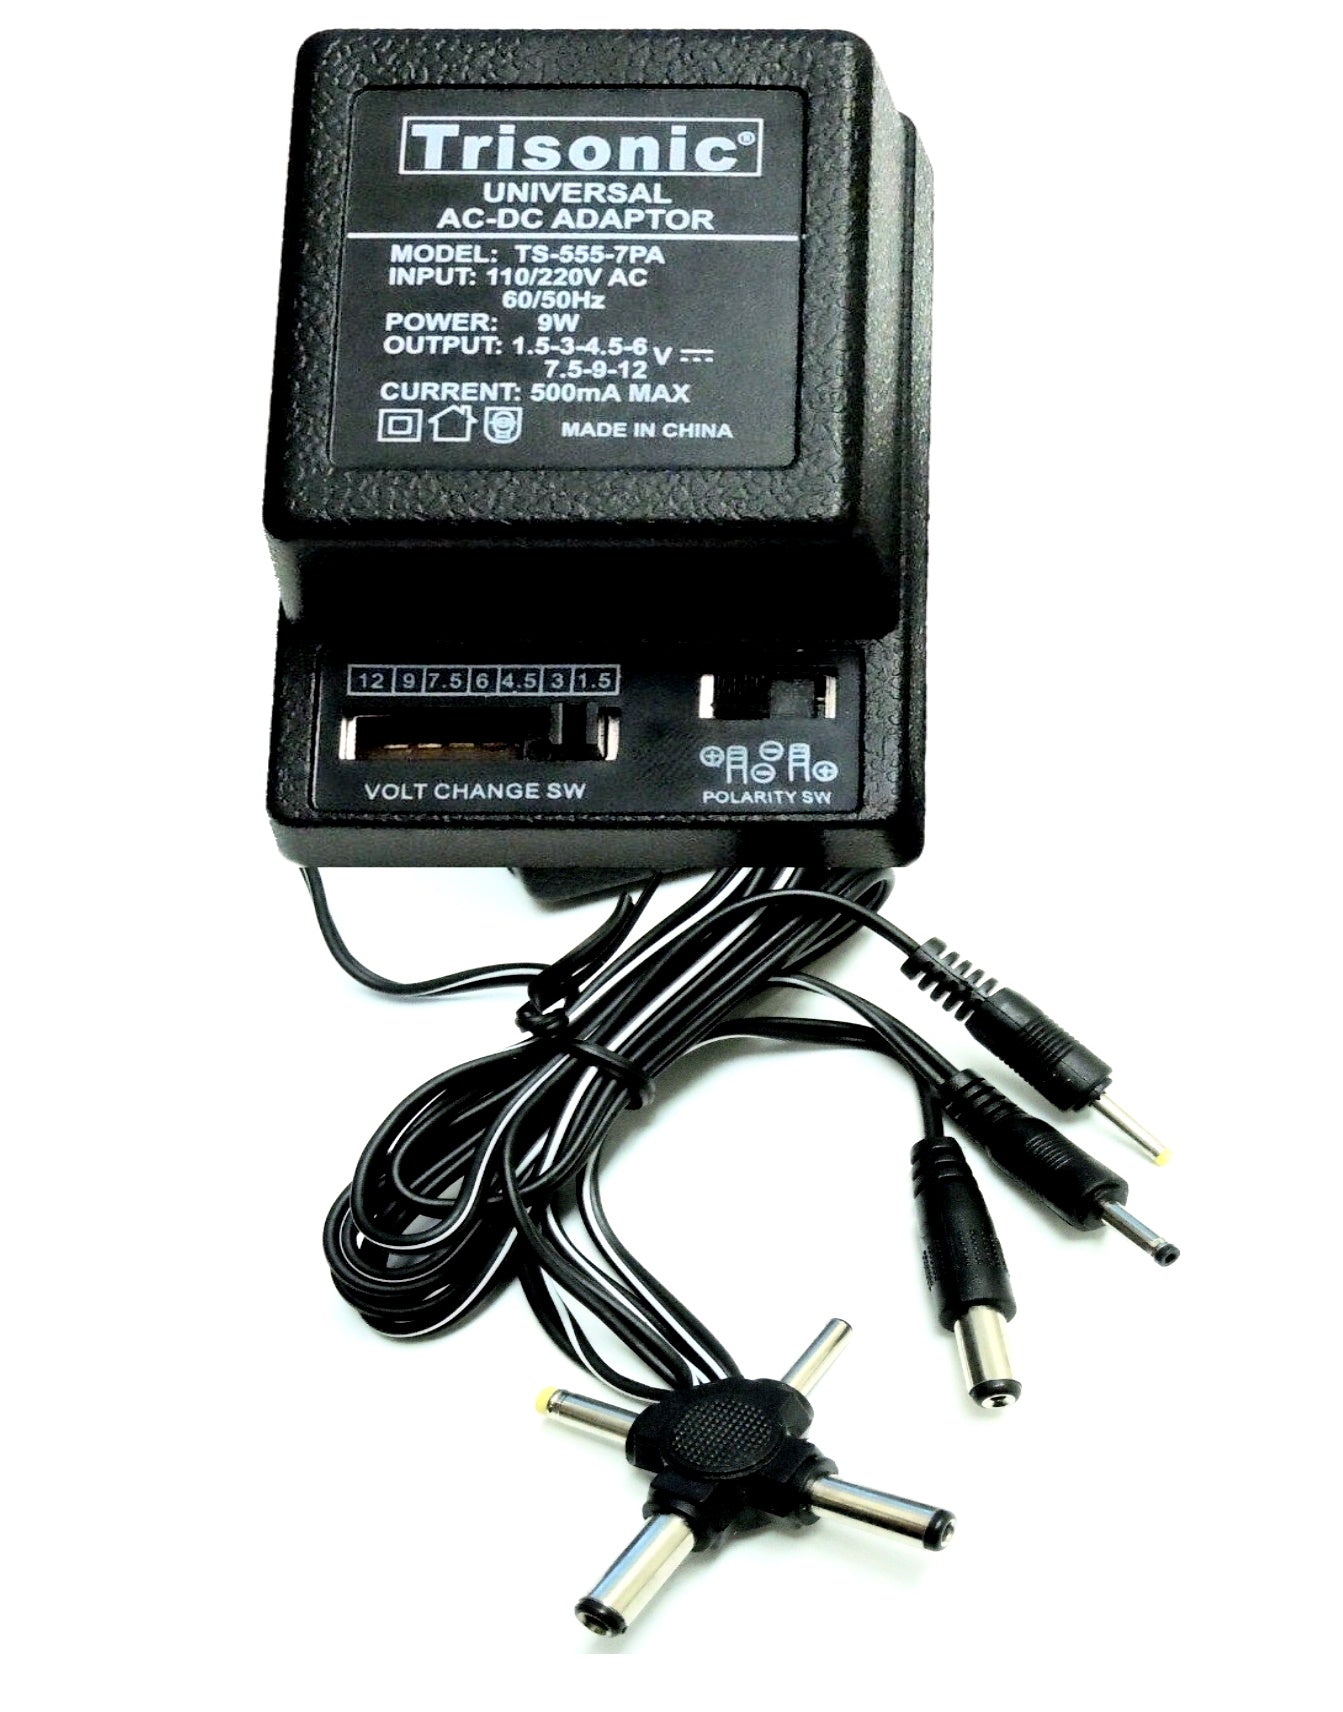 Universal AC to DC Power Adapter - Output 7 Way Universal Adjustable DC Voltage 500mA